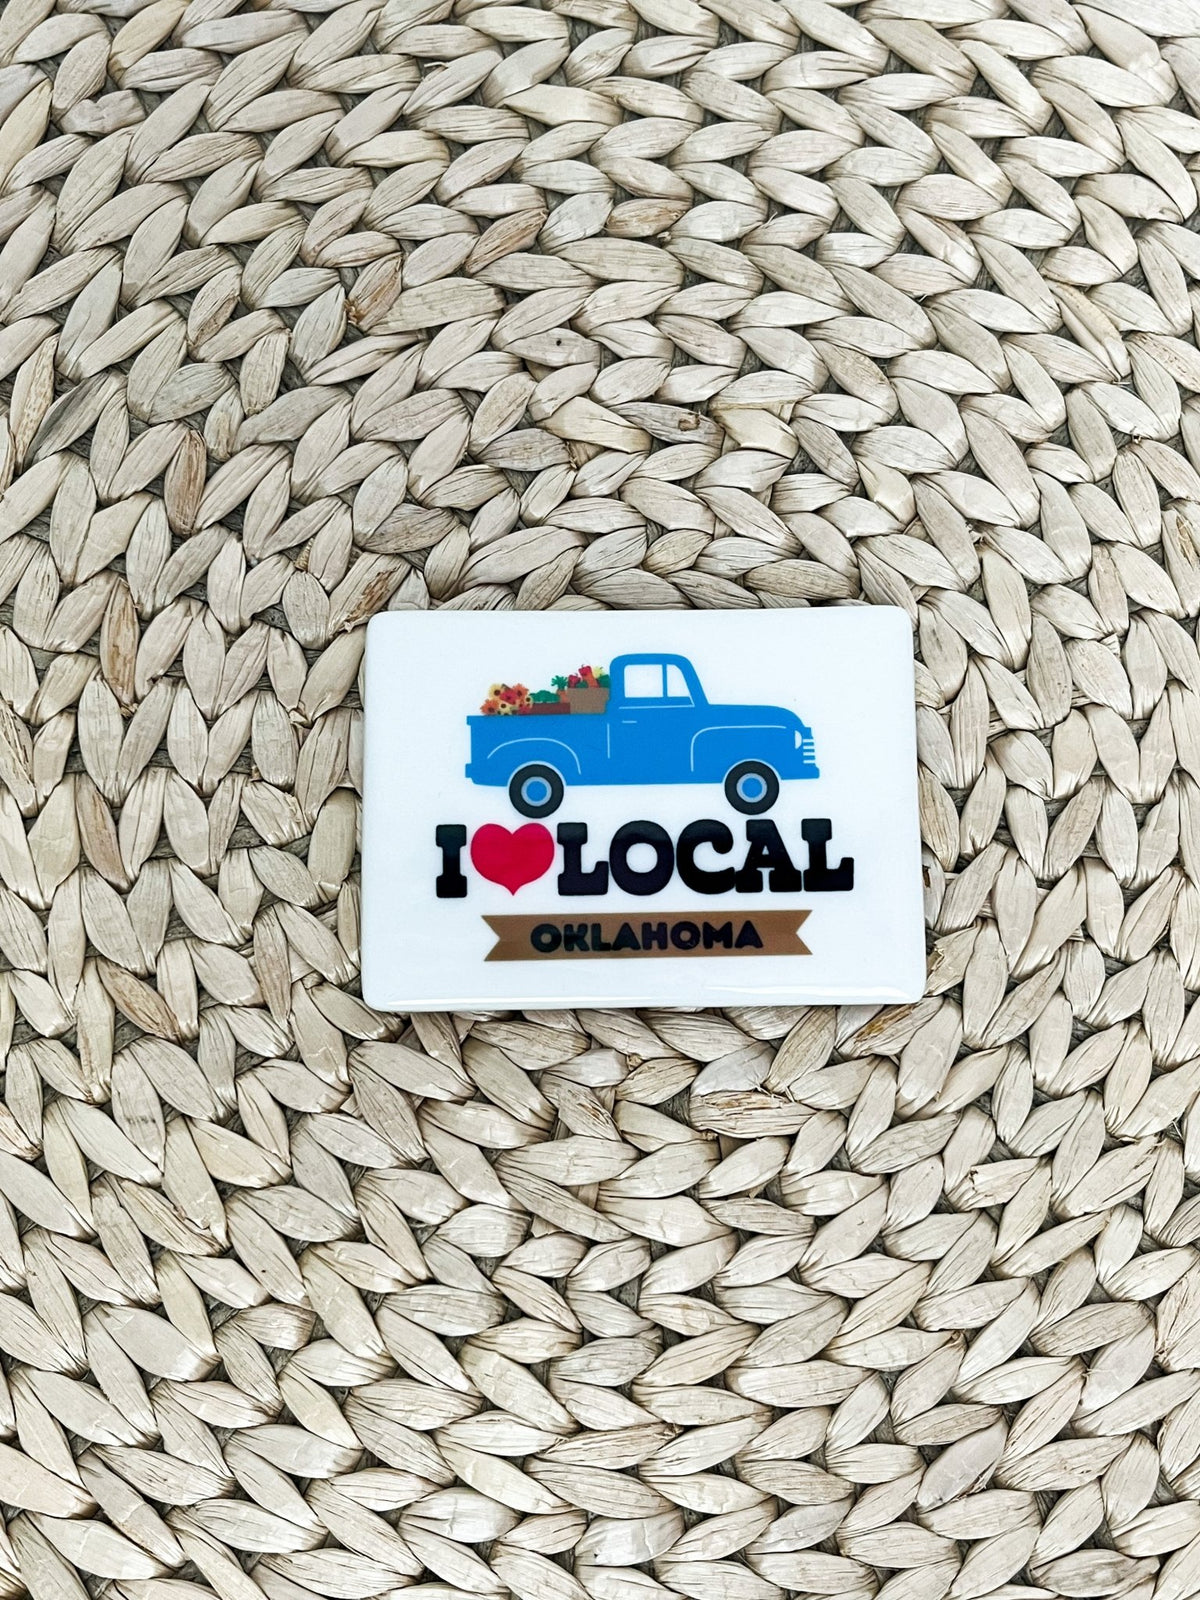 I love Oklahoma magnet - Trendy Gifts at Lush Fashion Lounge Boutique in Oklahoma City